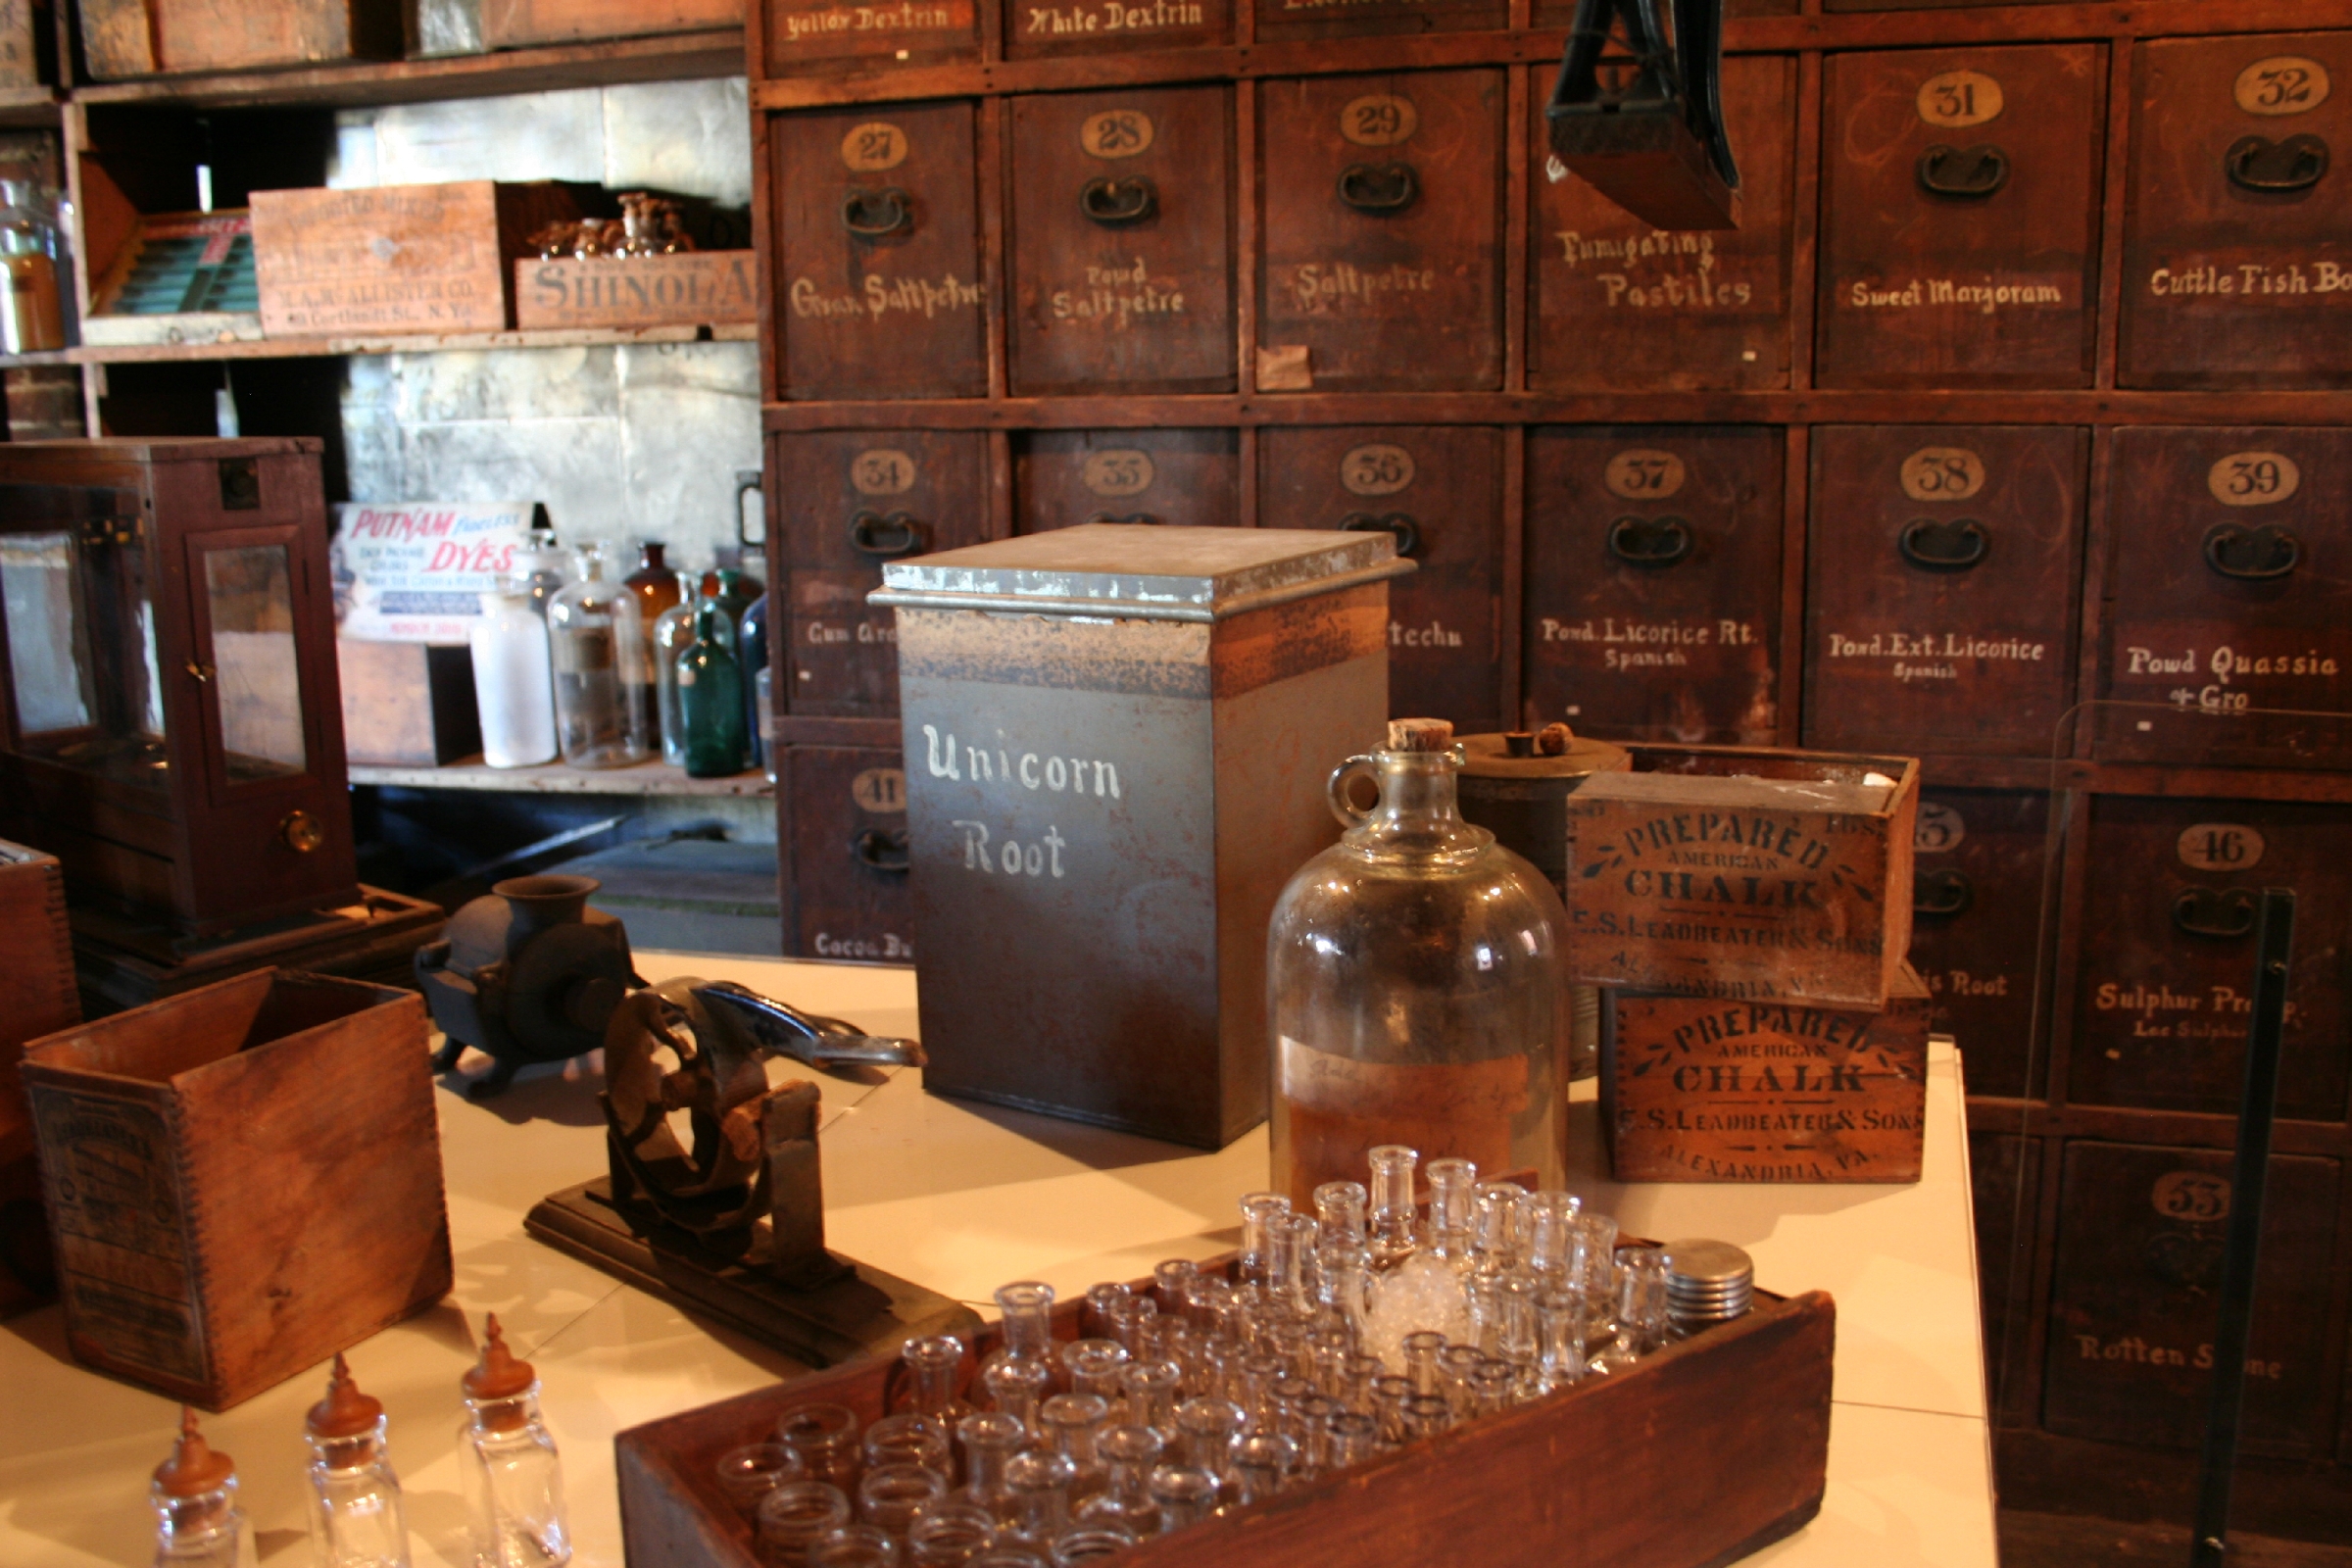 Unicorn root and potions at the Stabler-Leadbeater Apothecary Museum